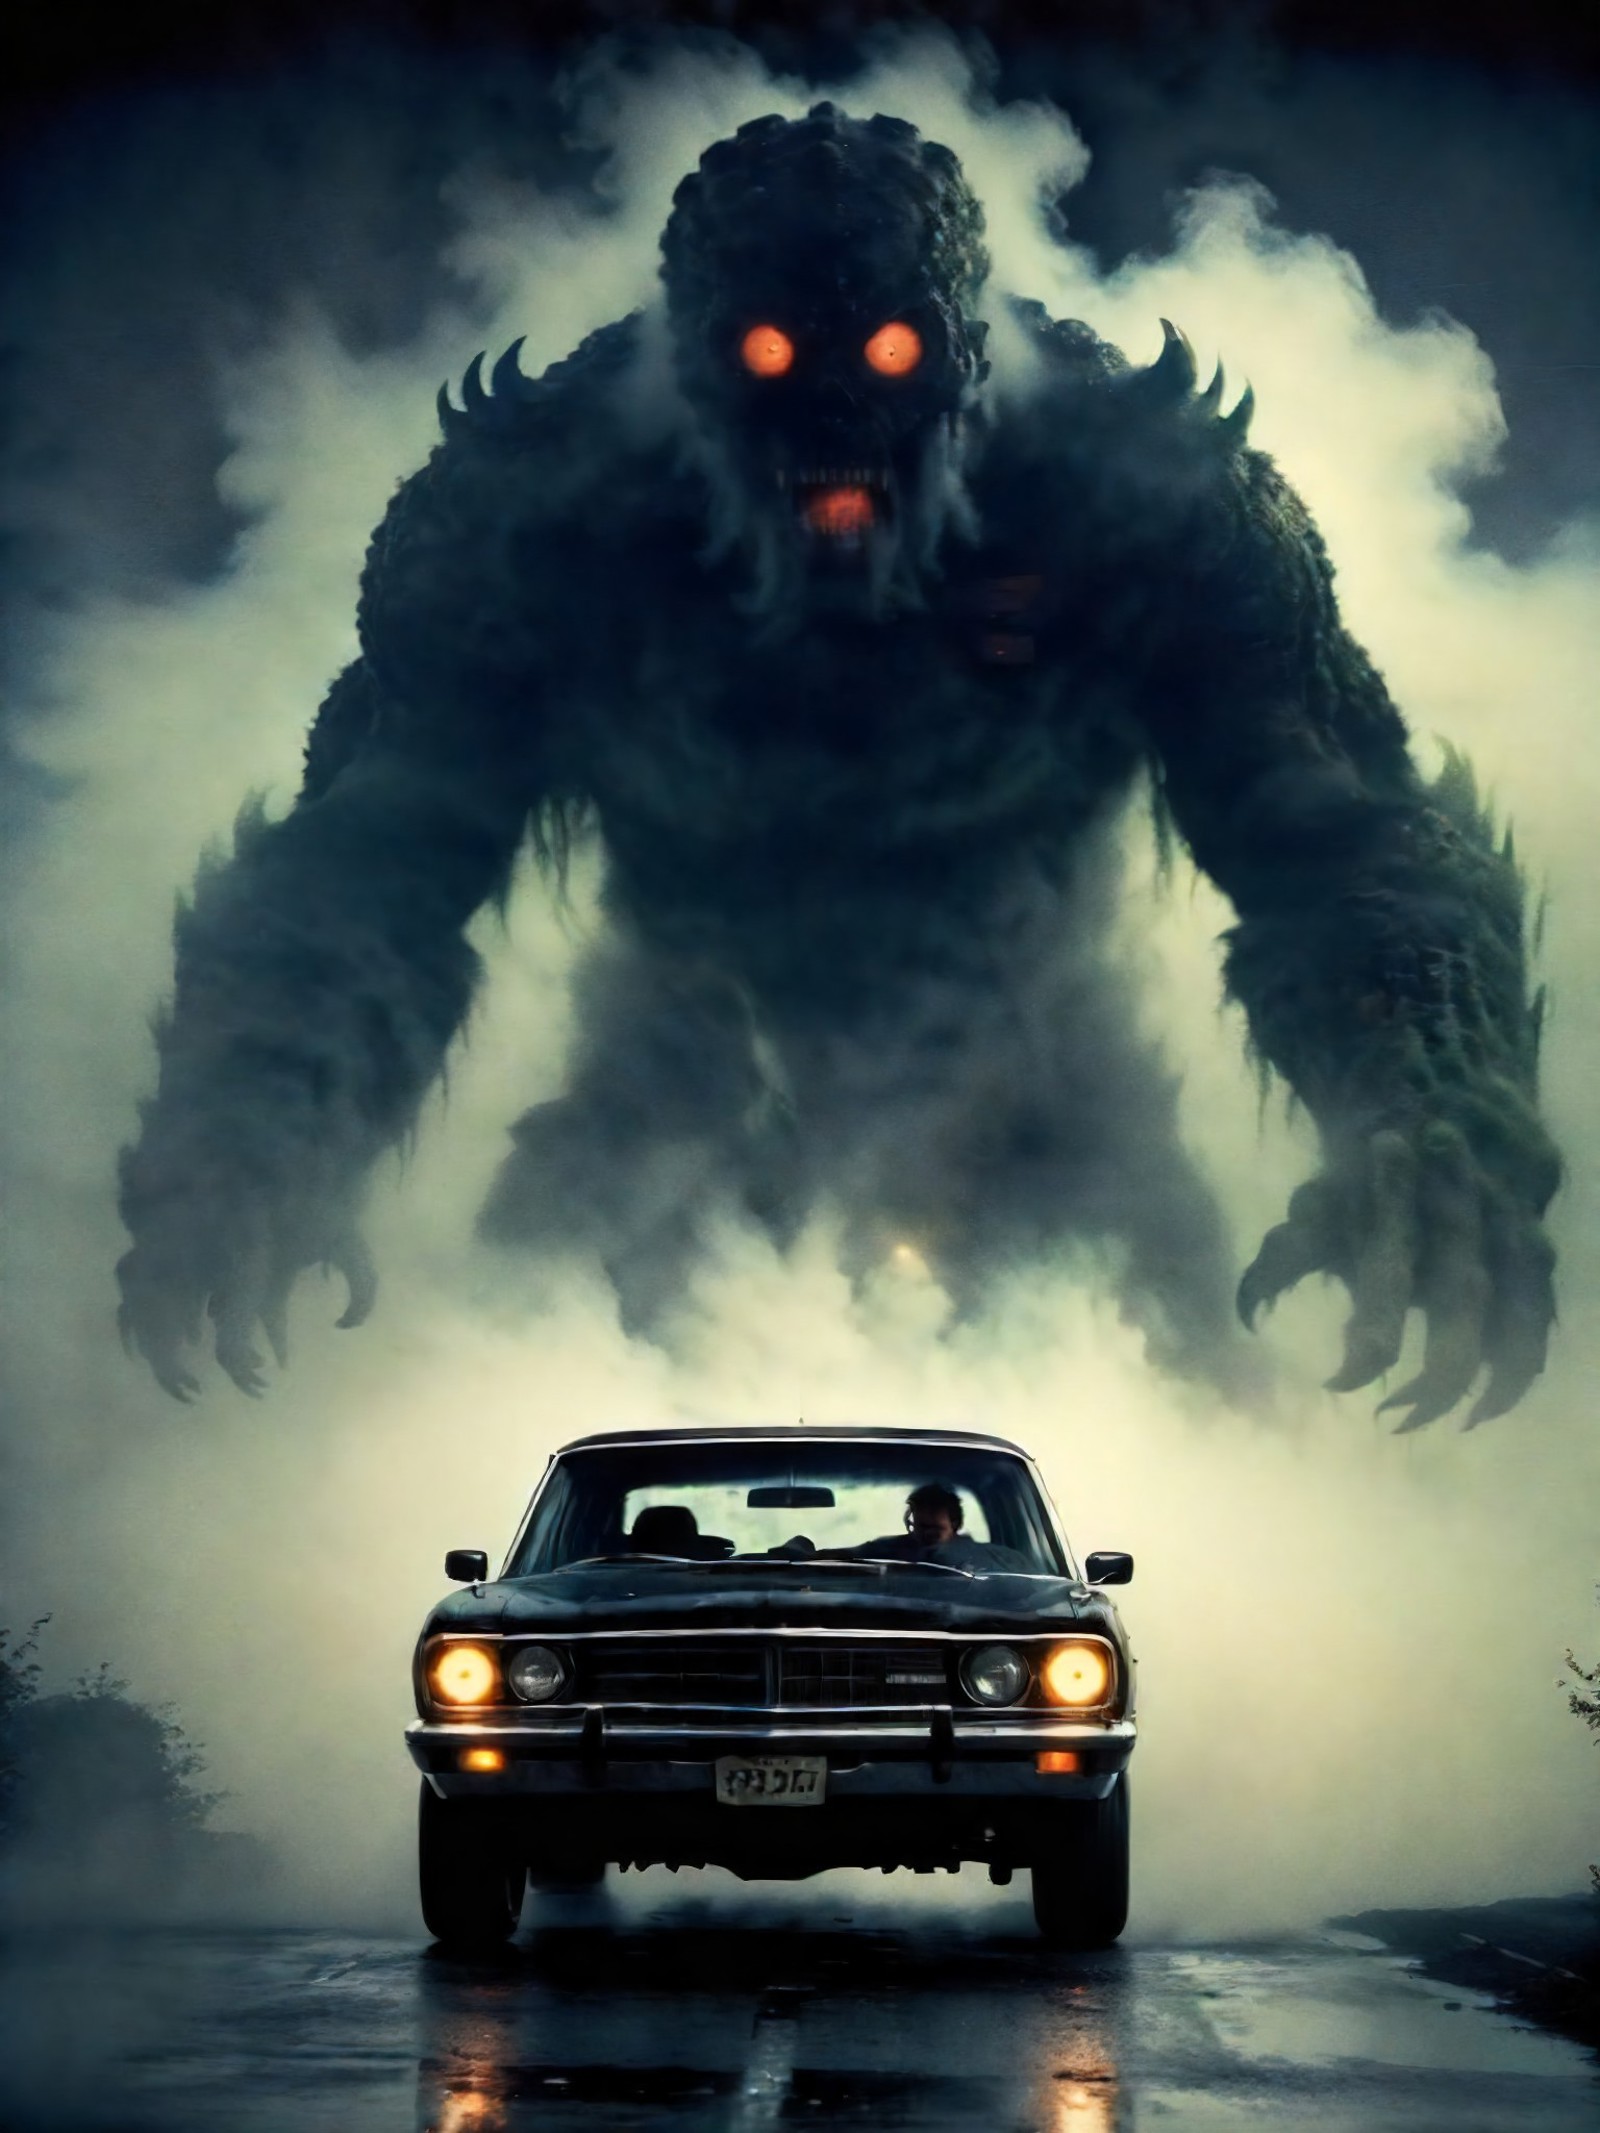 A black and white image of a classic car with its headlights on, driving down a dark road with a large monster or creature looming behind it. The car is in front of the creature, creating a sense of danger and suspense. The scene appears to be in black and white, adding to the dramatic effect and making the monster more prominent. The car occupants are visible, but the focus is on the monster and the car's journey through the unknown.